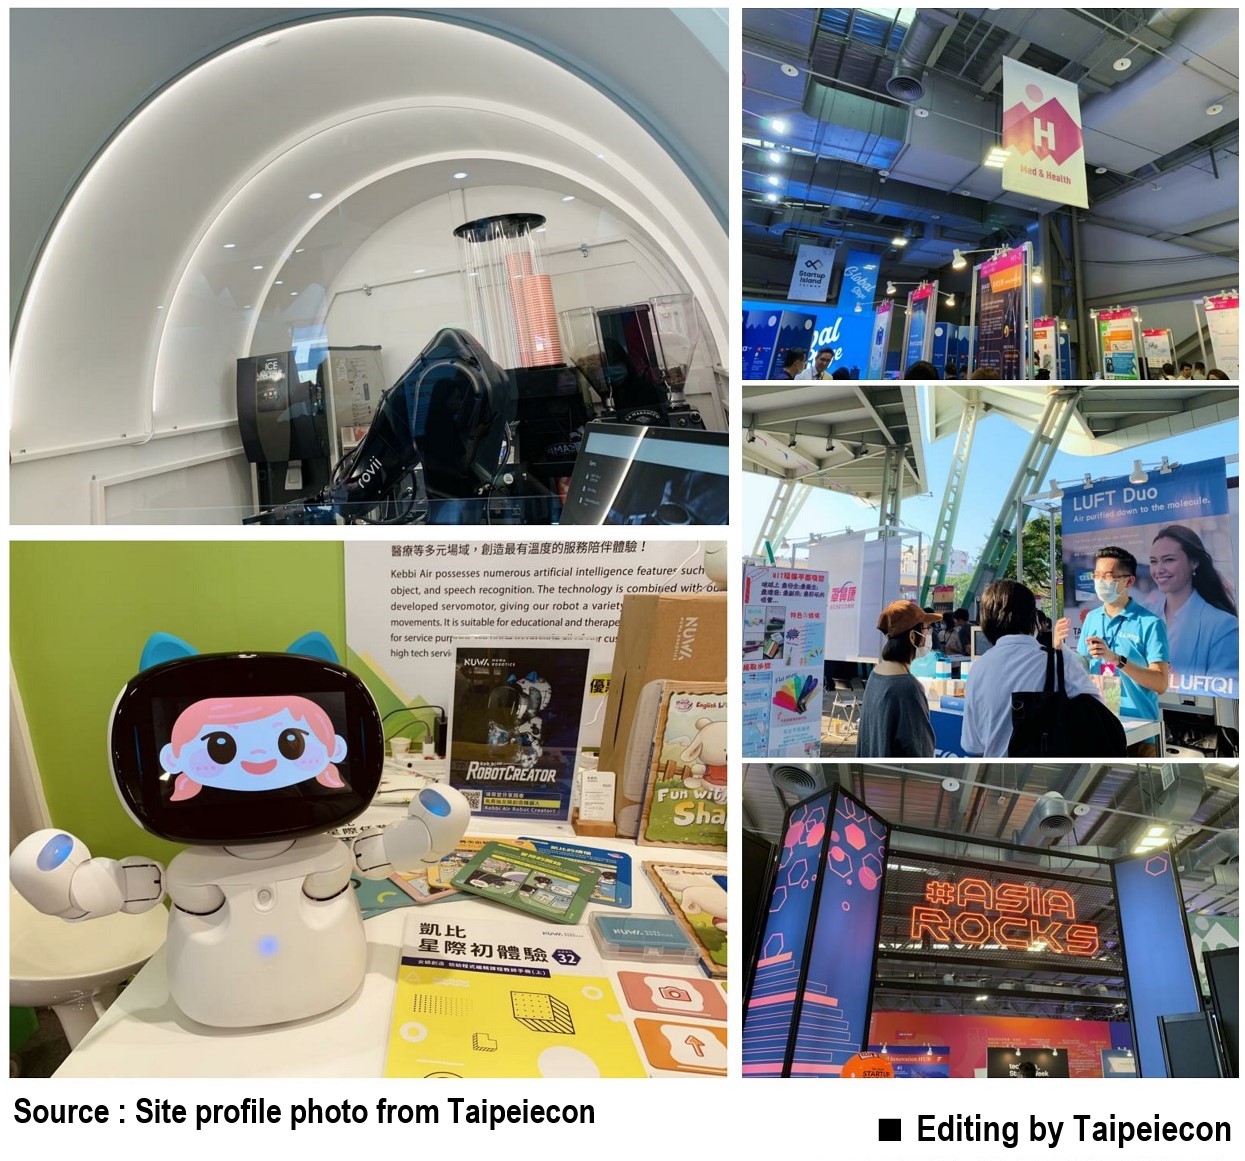 2020 Meet Taipei Startup Festival includes three major technology exhibition areas such as 5G, XR, and blockchain for cross-domain integration.